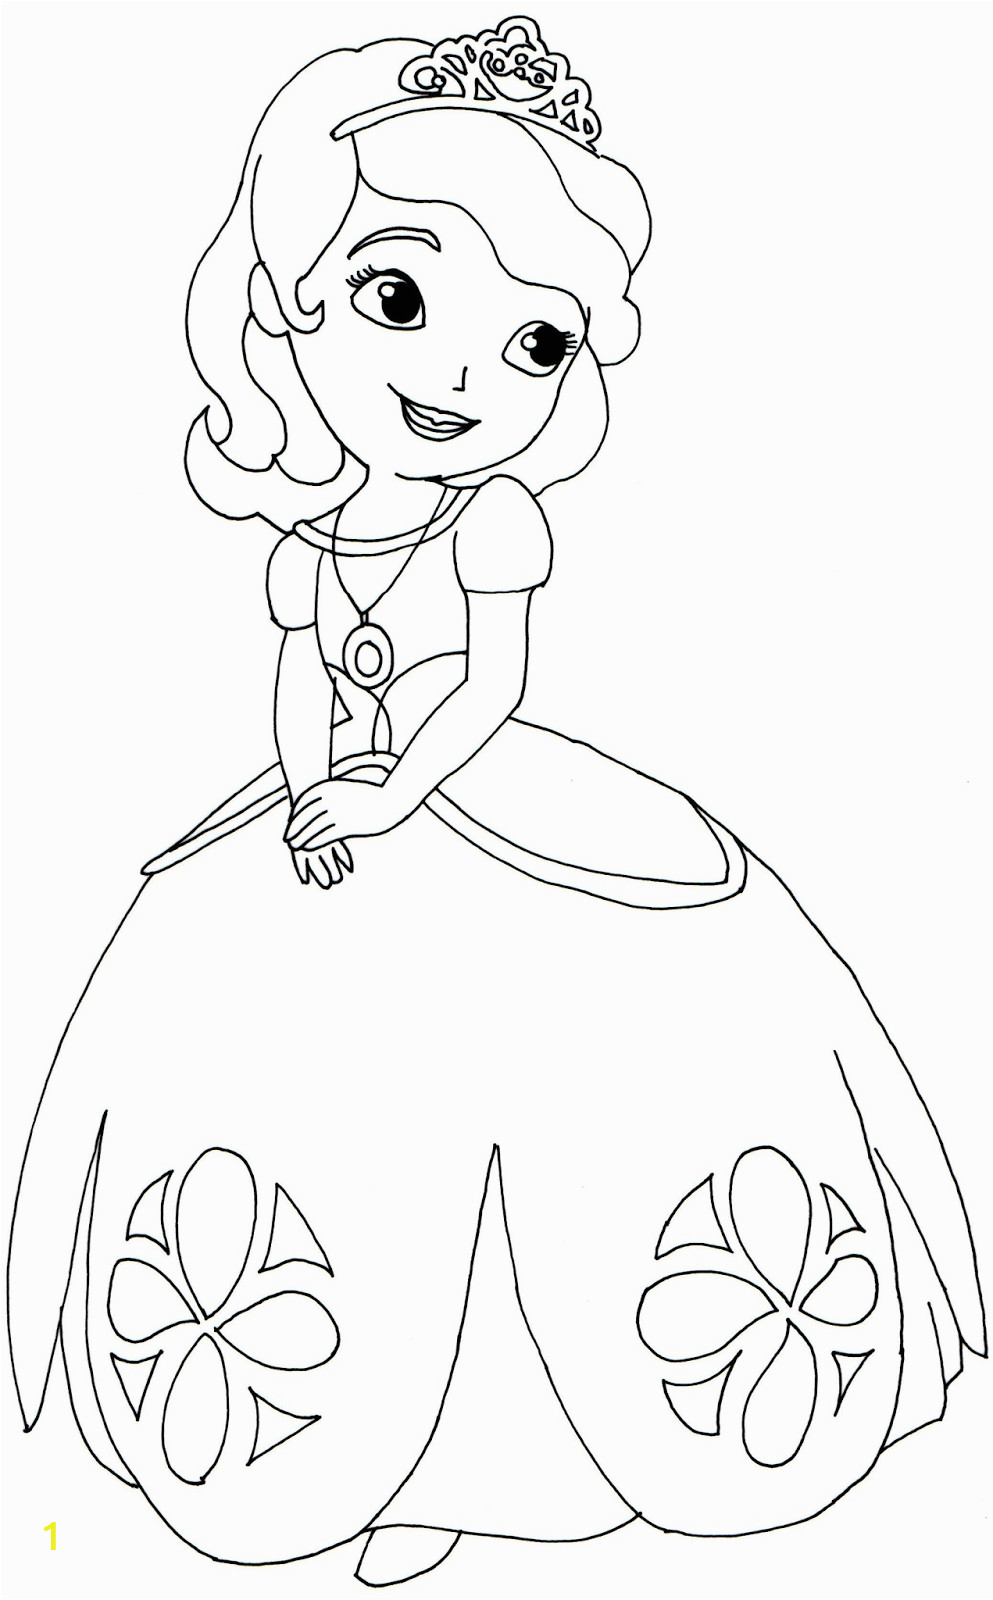 Sofia the First Printable Coloring Pages sofia the First Coloring Pages sofia the First Coloring Page